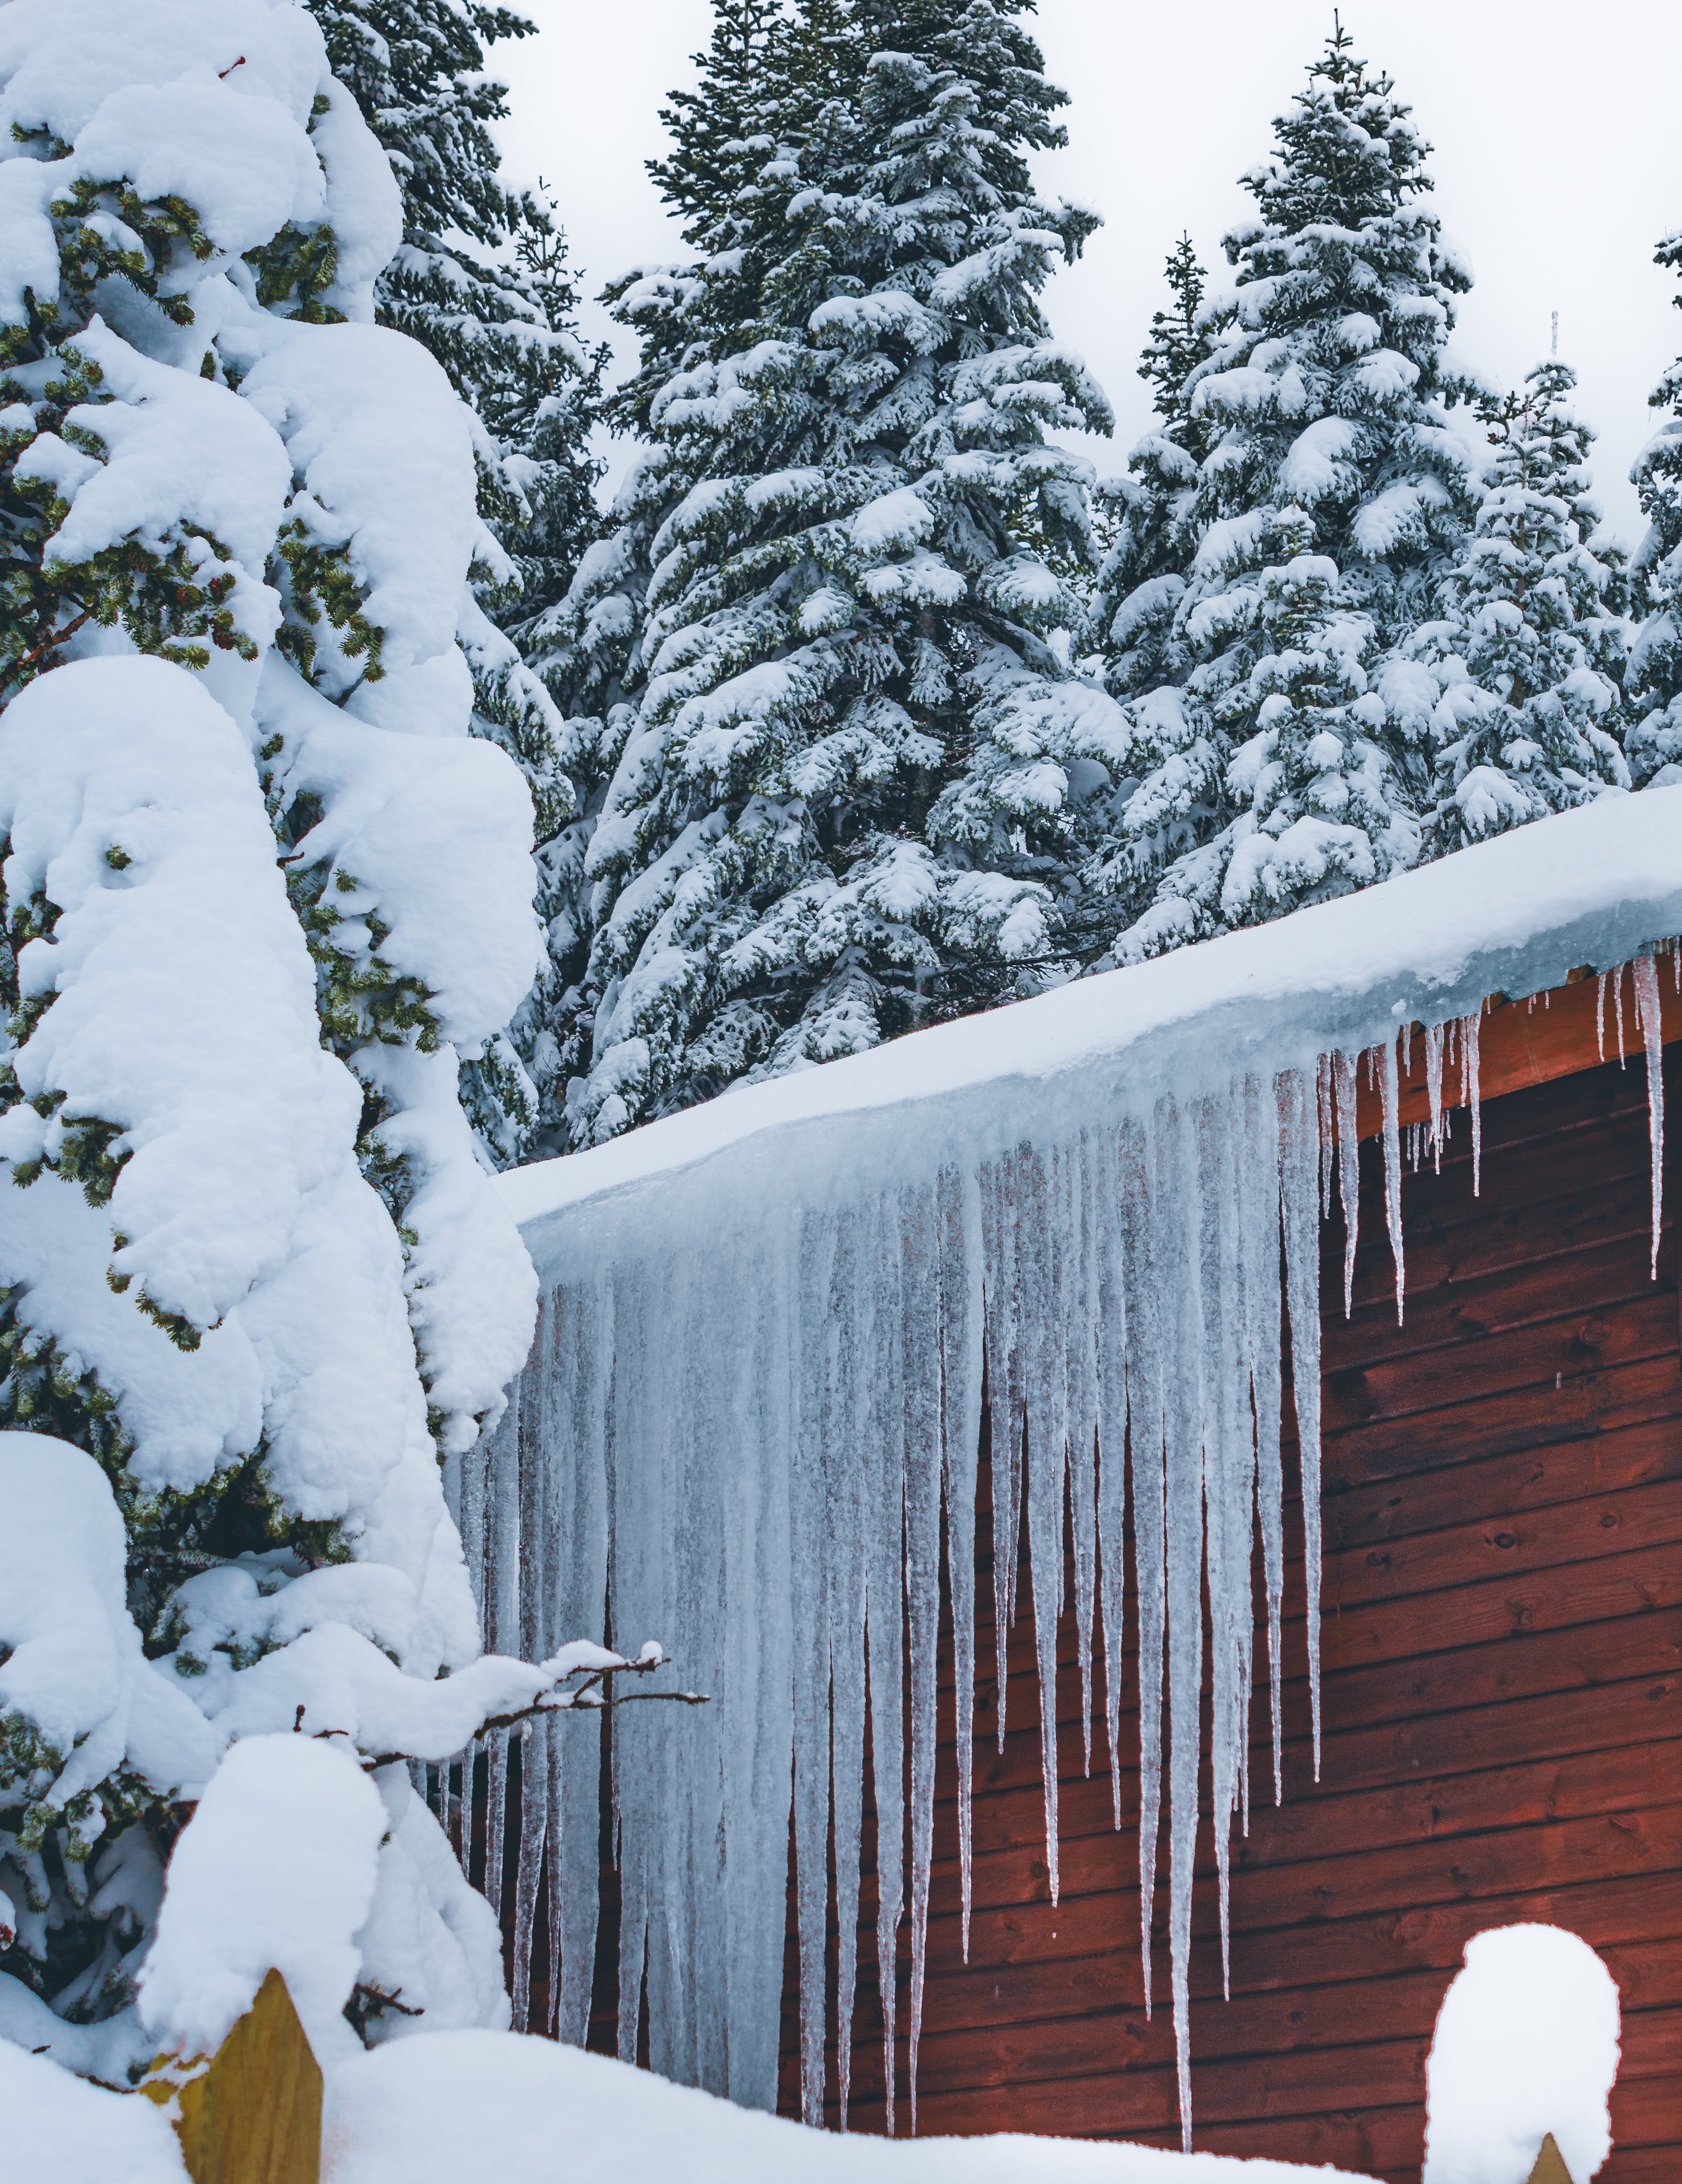 When ice melts, it can cause leaks by running down bathroom vents. | Source: Pexels